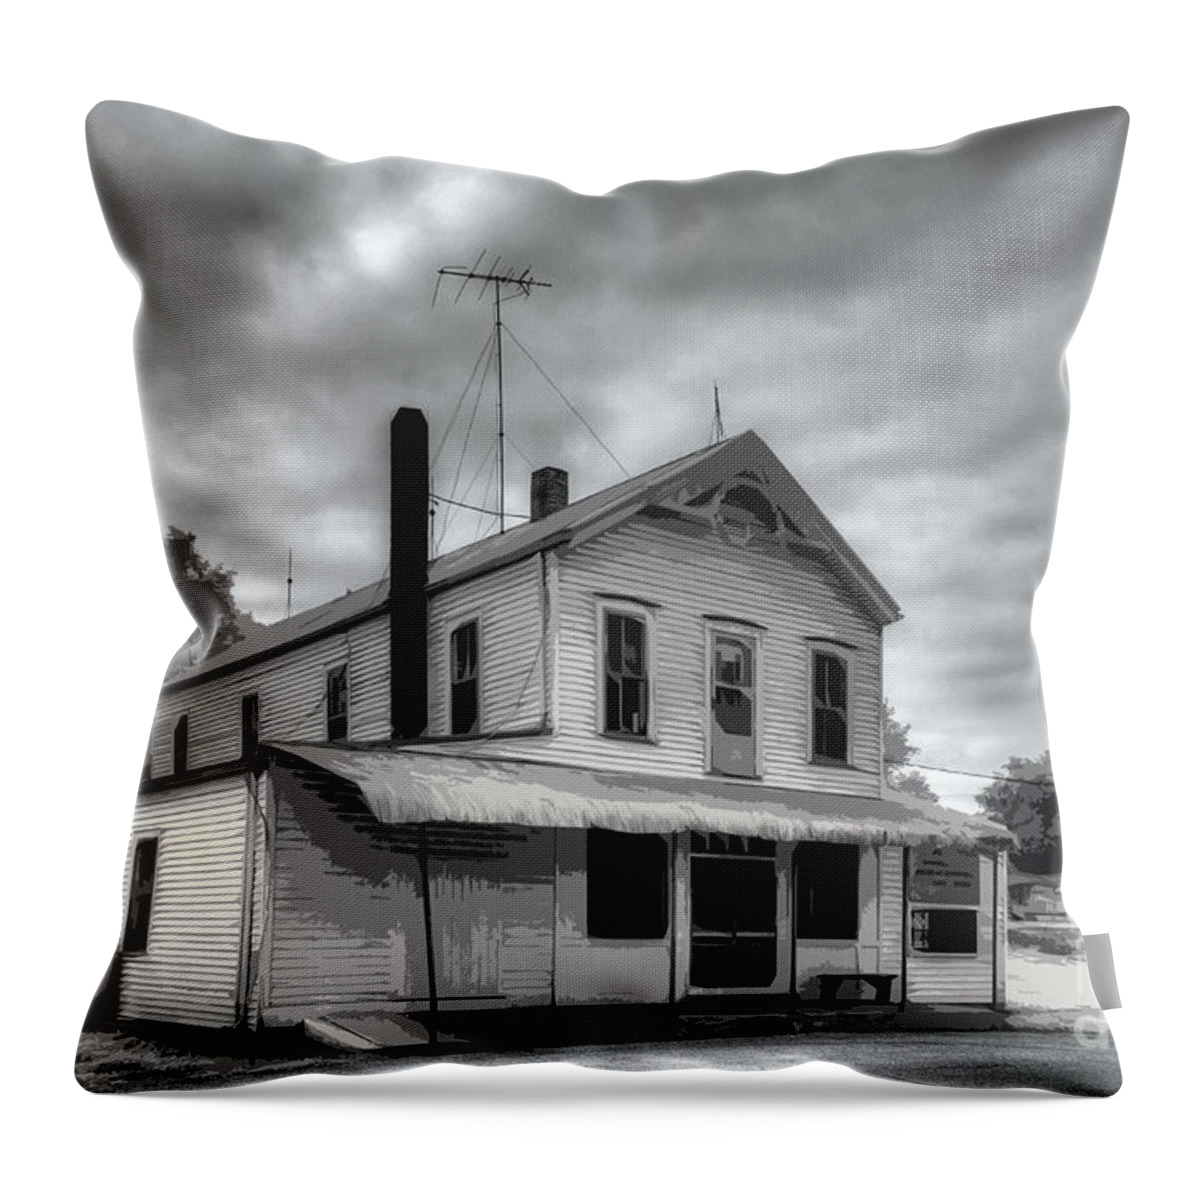 At Peers Bluff Road Throw Pillow featuring the digital art At Peers Bluff Road by William Fields